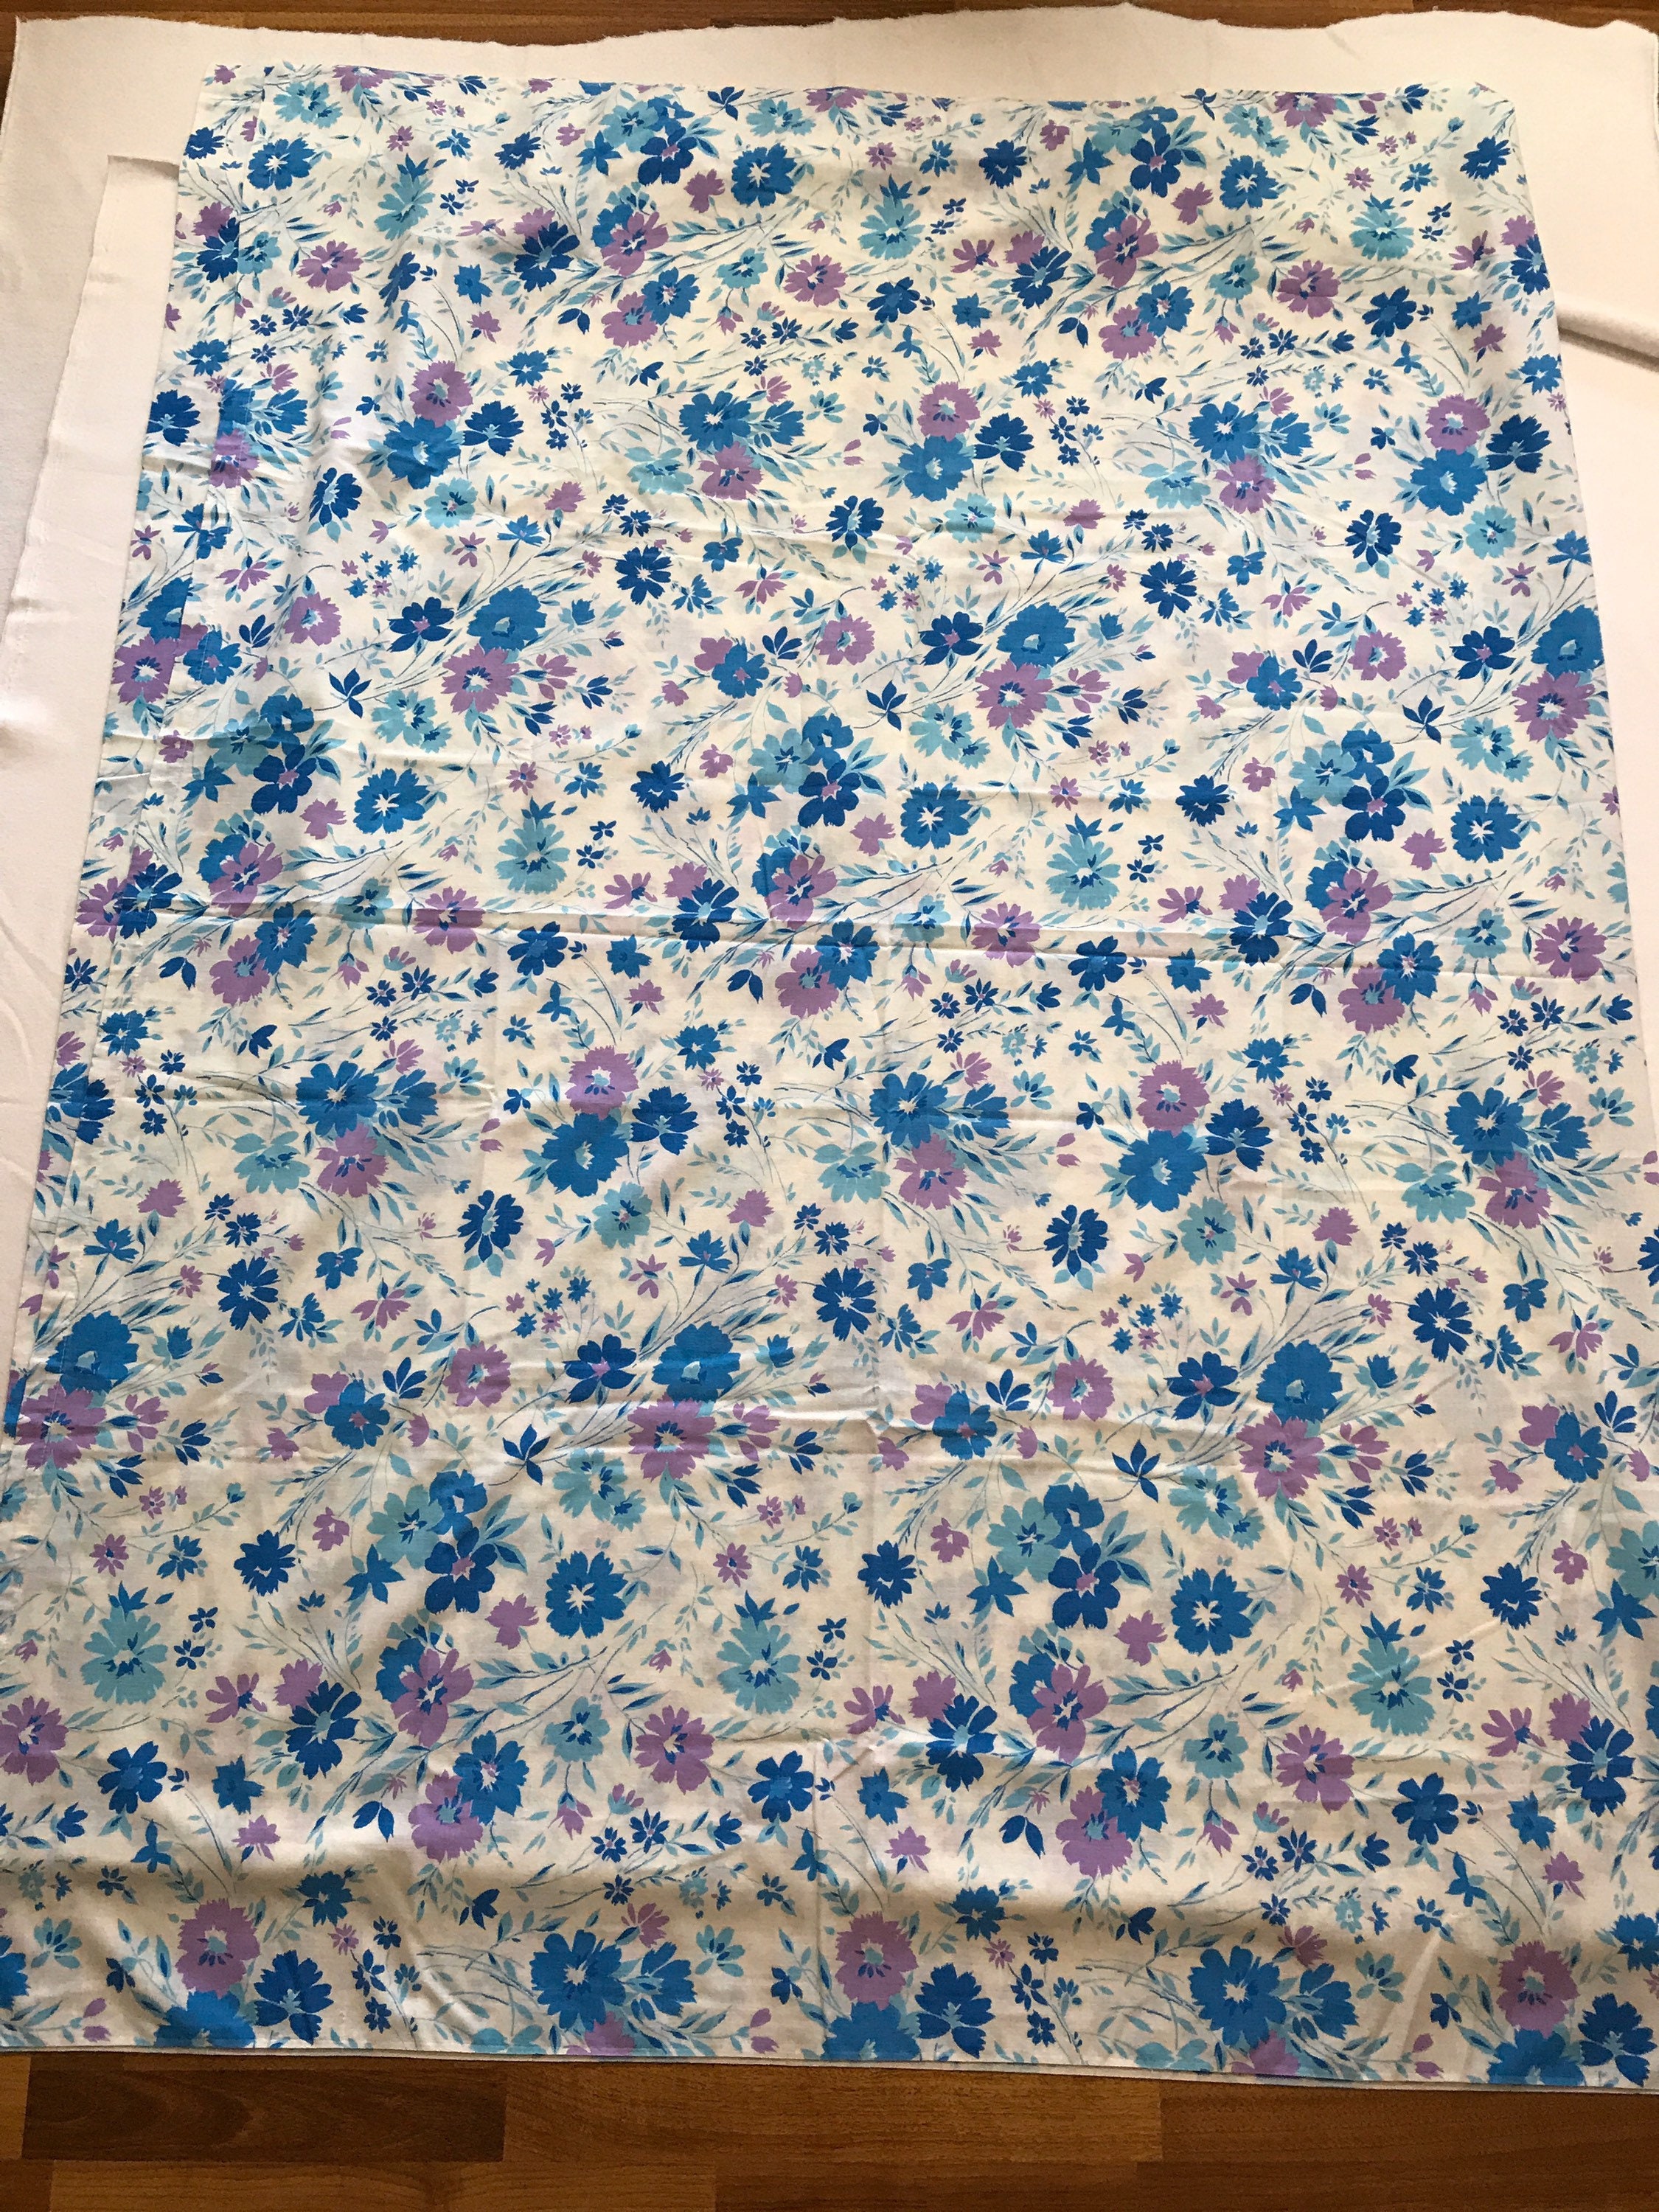 Vintage 1970s Flower Power Twin Flat Sheet Blue and Purple | Etsy